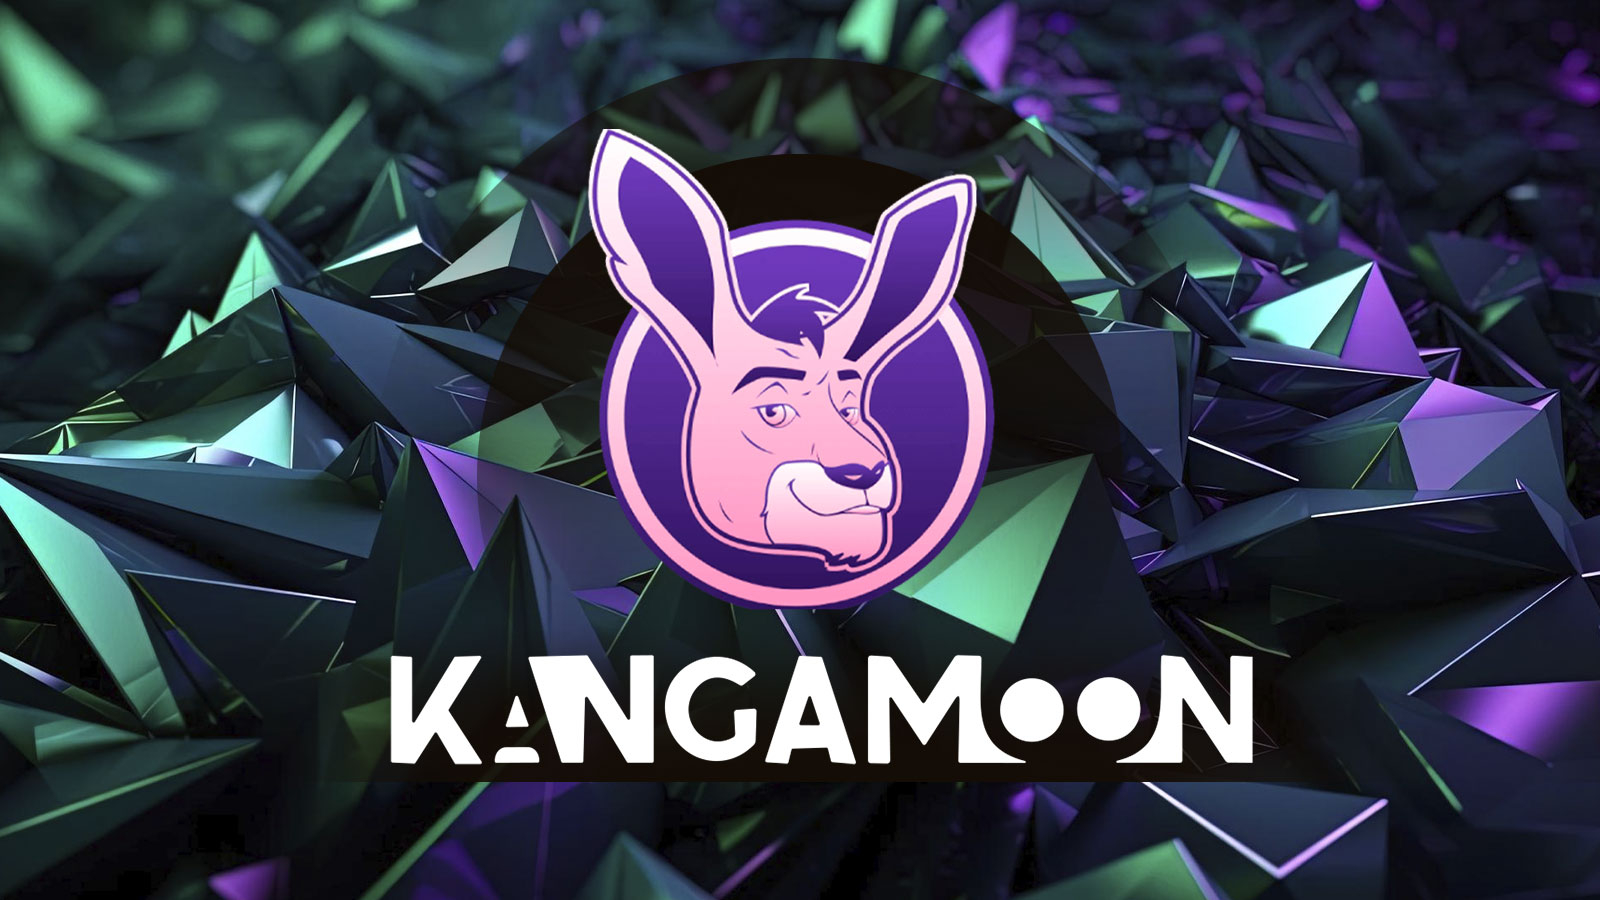 KangaMoon (KANG) Pre-Sale Welcomes New Supporters in April as Shiba Inu (SHIB) and Algorand (ALGO) Top Altcoins Recover Fast